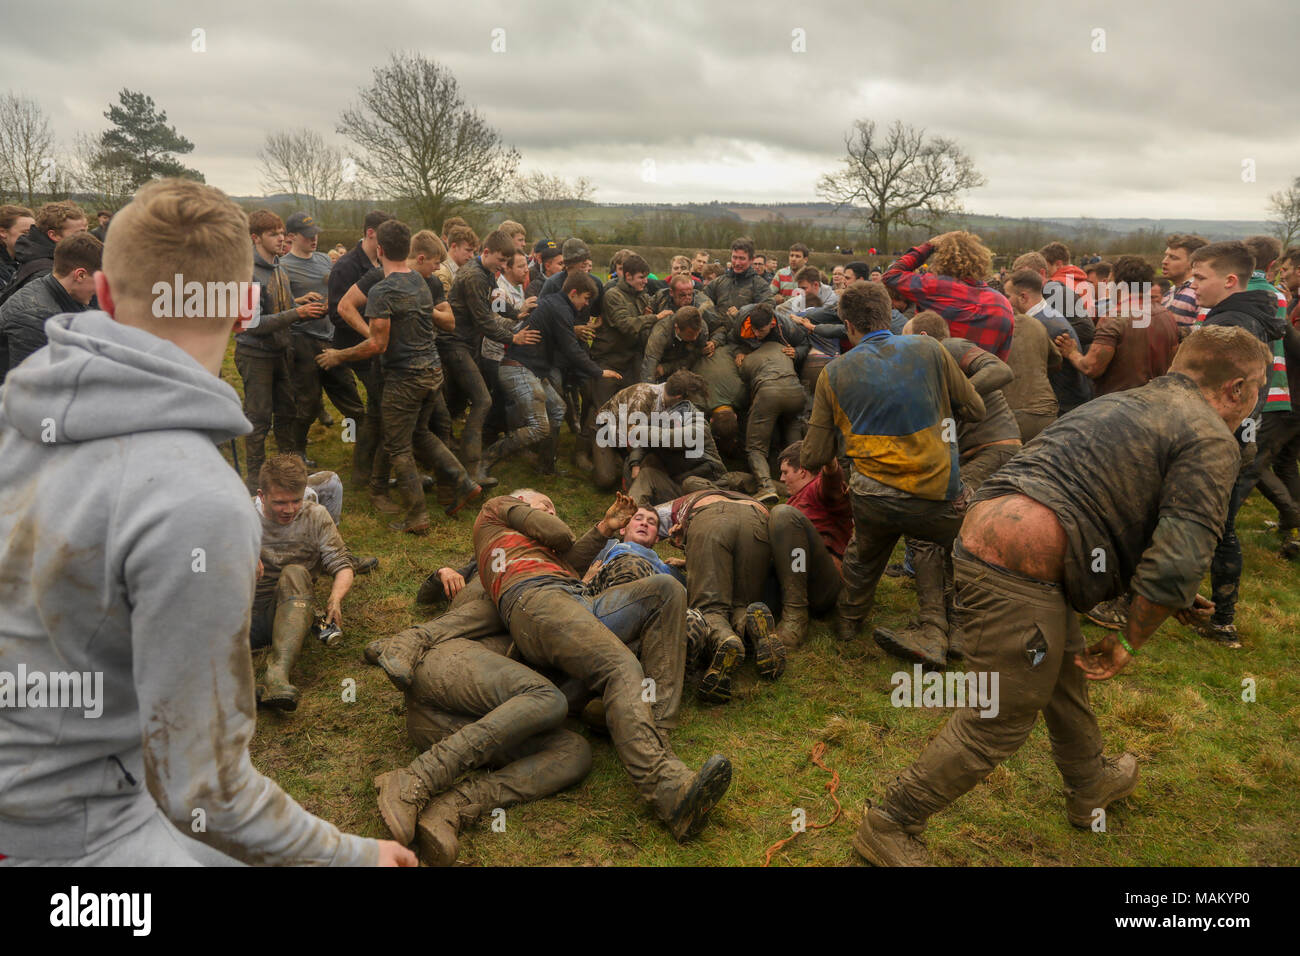 Hallaton, Leicestershire, England, UK. 2nd April 2018. The ancient tradition of Hallaton Hare Pie Scramble and Bottle Kicking. A custom comprising of a procession followed by a charity dole administered by the local Vicar. There then follows a “ballgame” played with small wooden casks called bottles between two local villages, Hallaton and Medbourne. There are few if any rules and play can be fierce. Credit Haydn Denman/Alamy Live News. Stock Photo